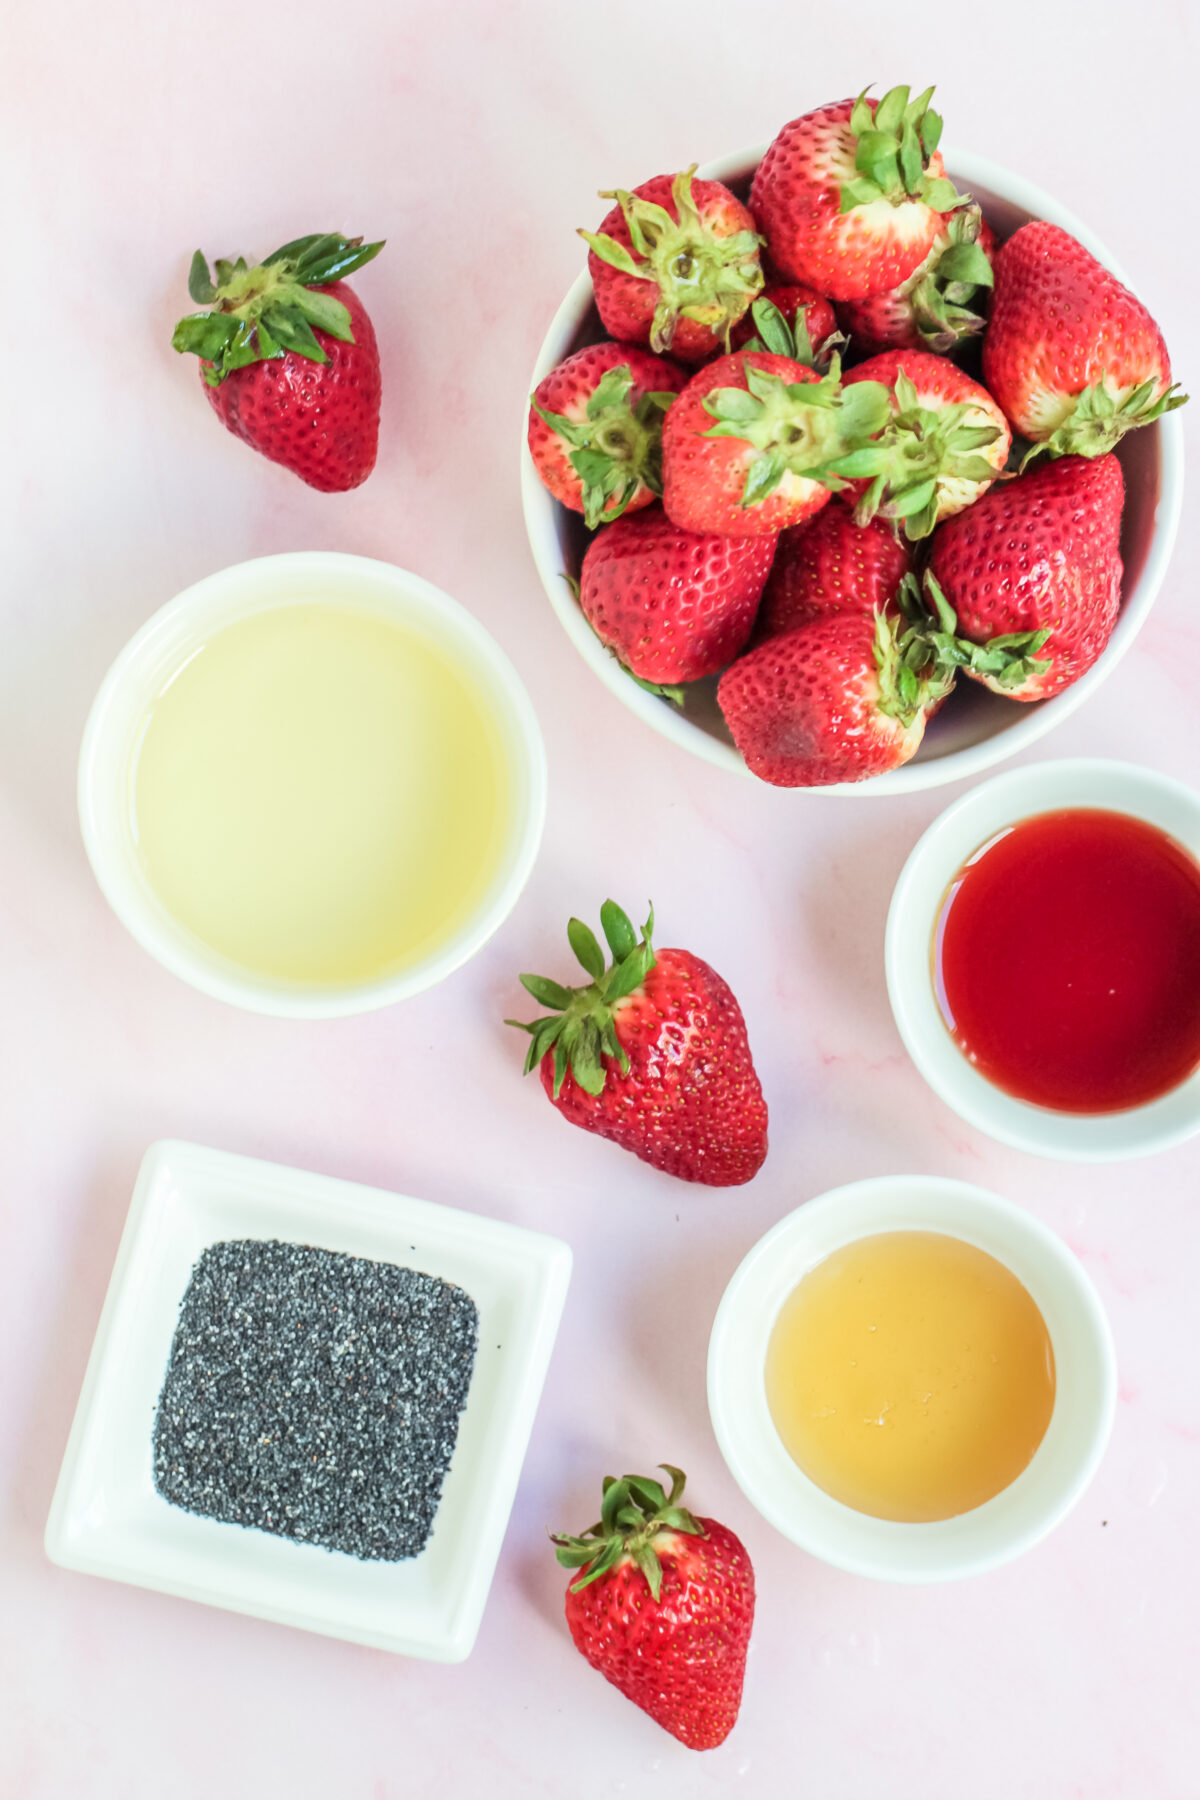 Ingredients for strawberry poppy seed dressing.